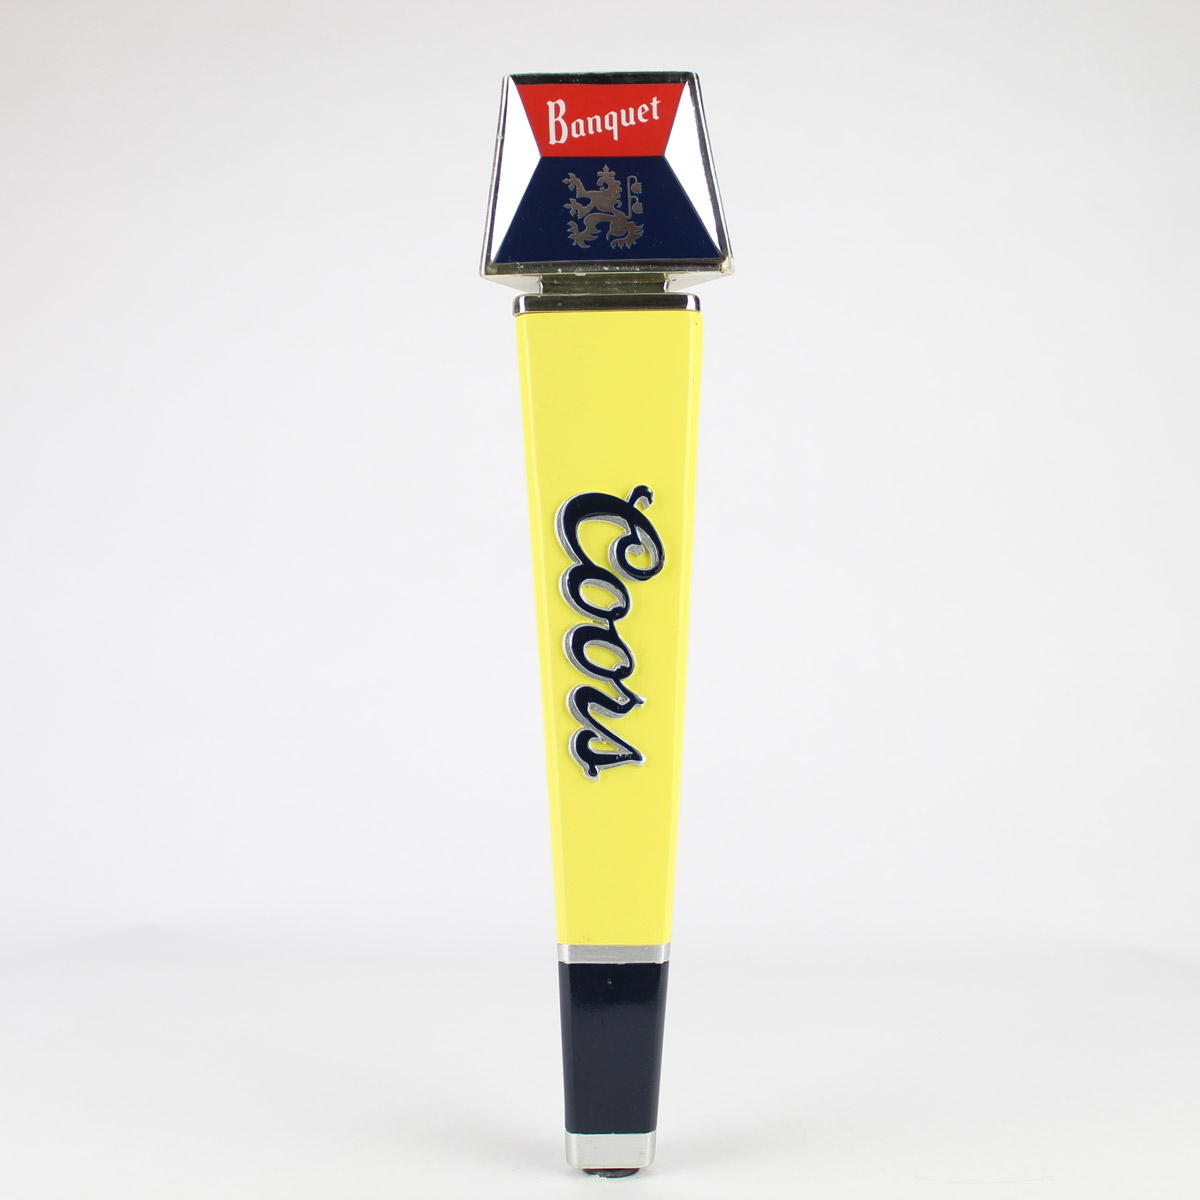 Brand New In Bag! Coors Banquet Classic Shotgun Mini Beer Tap Handle 6.5” Tall 